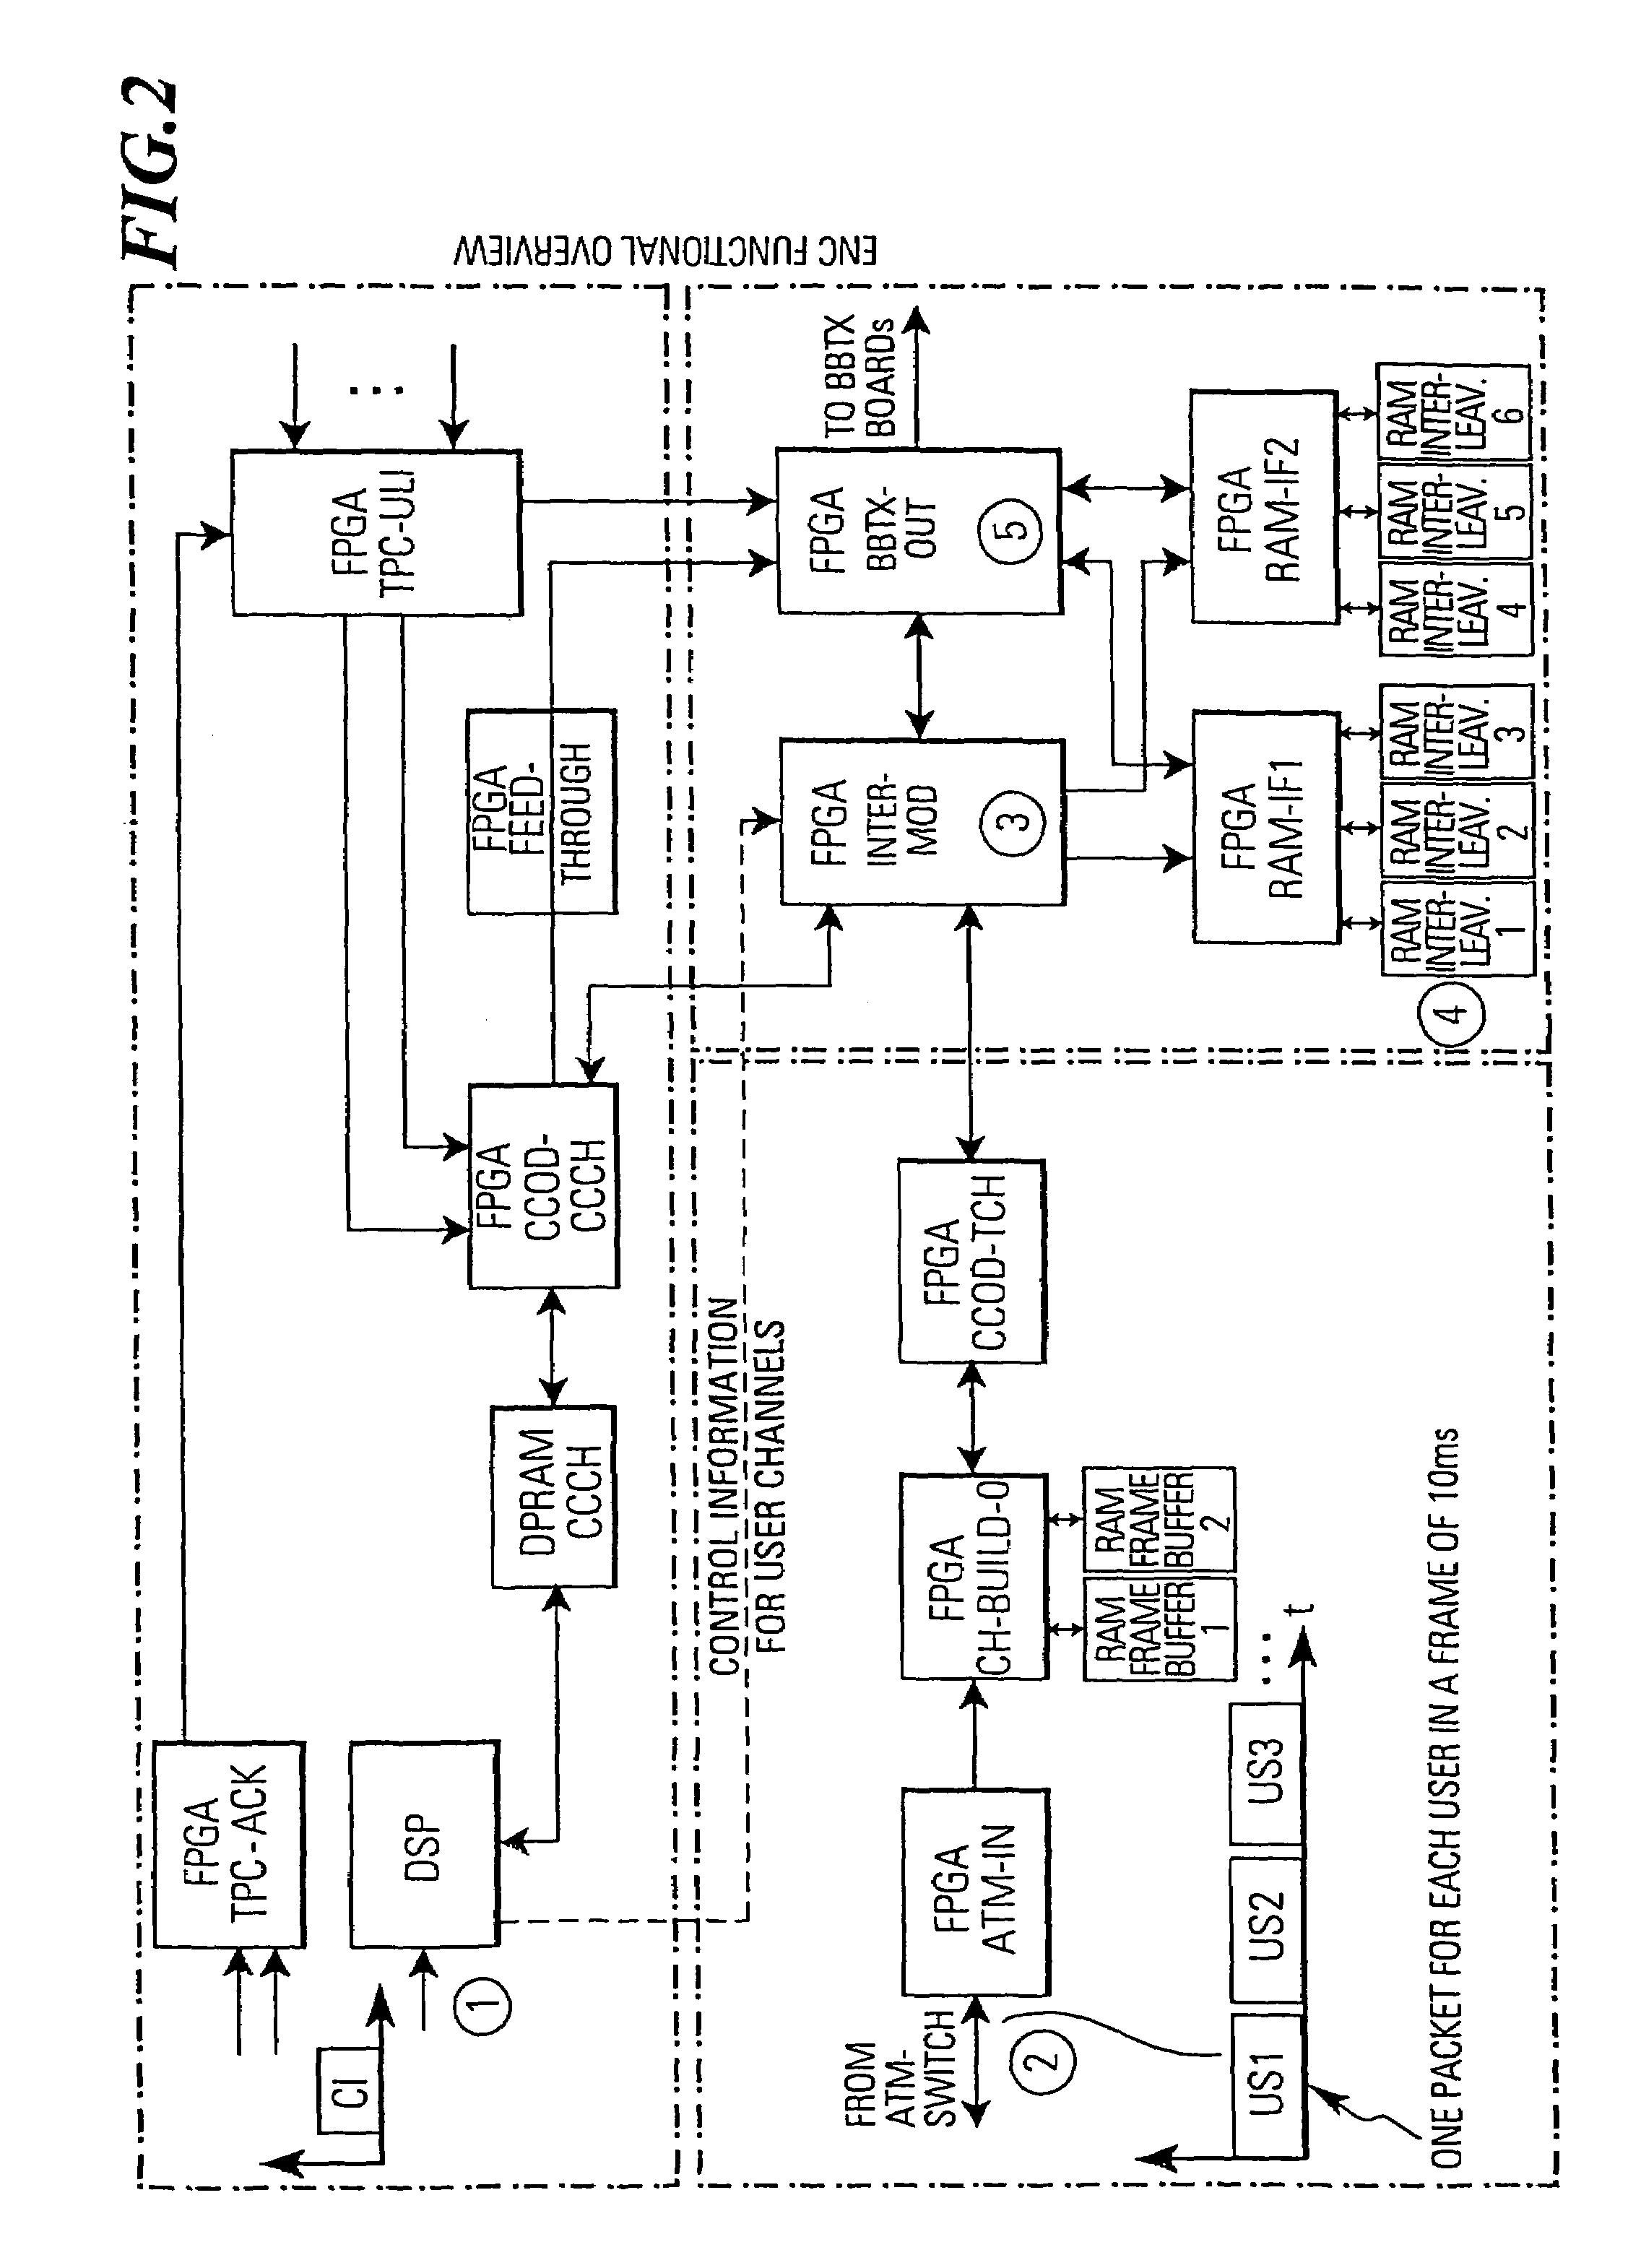 Interleaver and method for interleaving an input data bit sequence using a coded storing of symbol and additional information